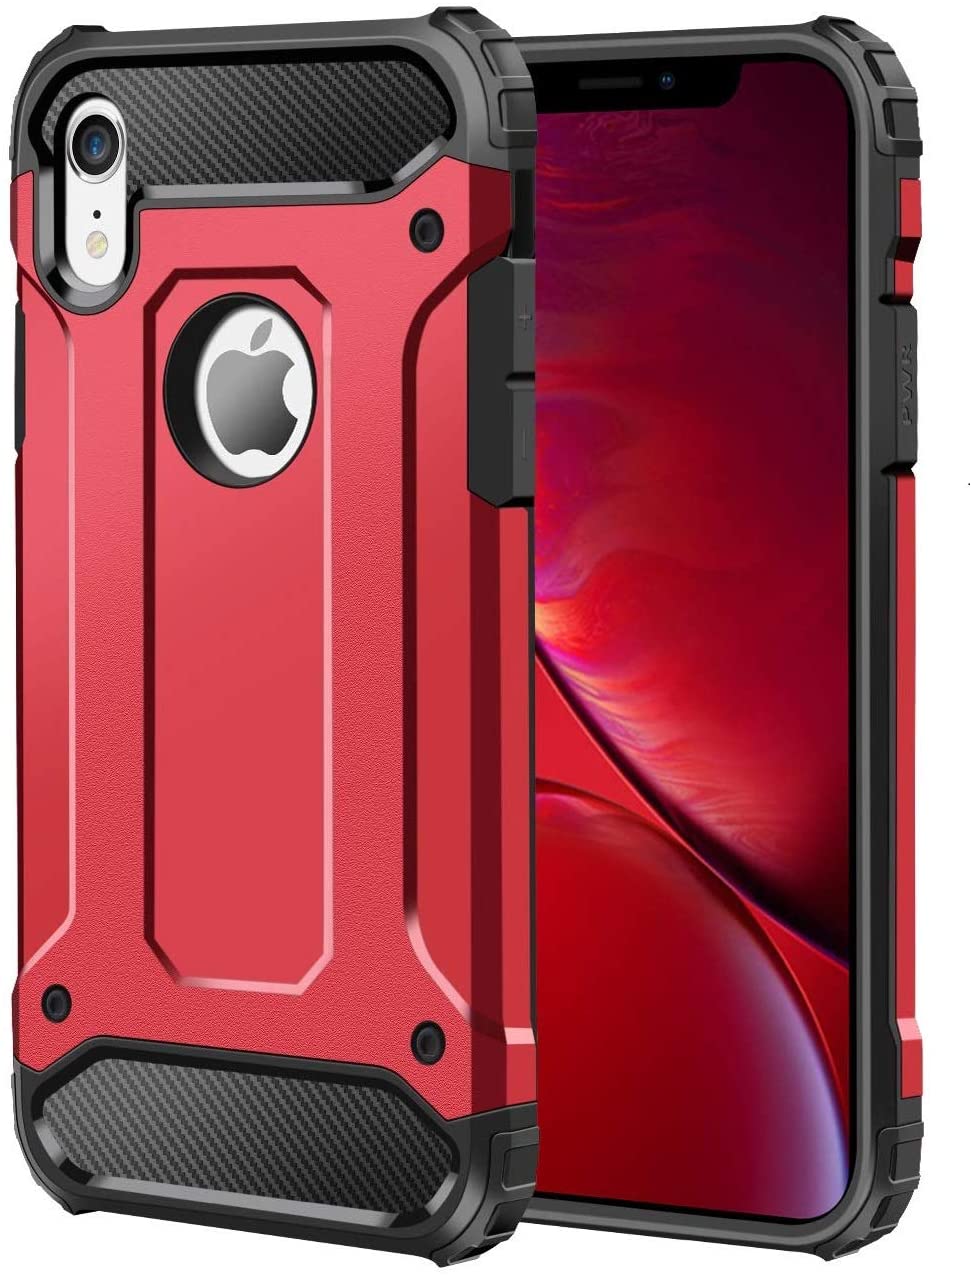 Armor iPhone XS max Case - e4cents